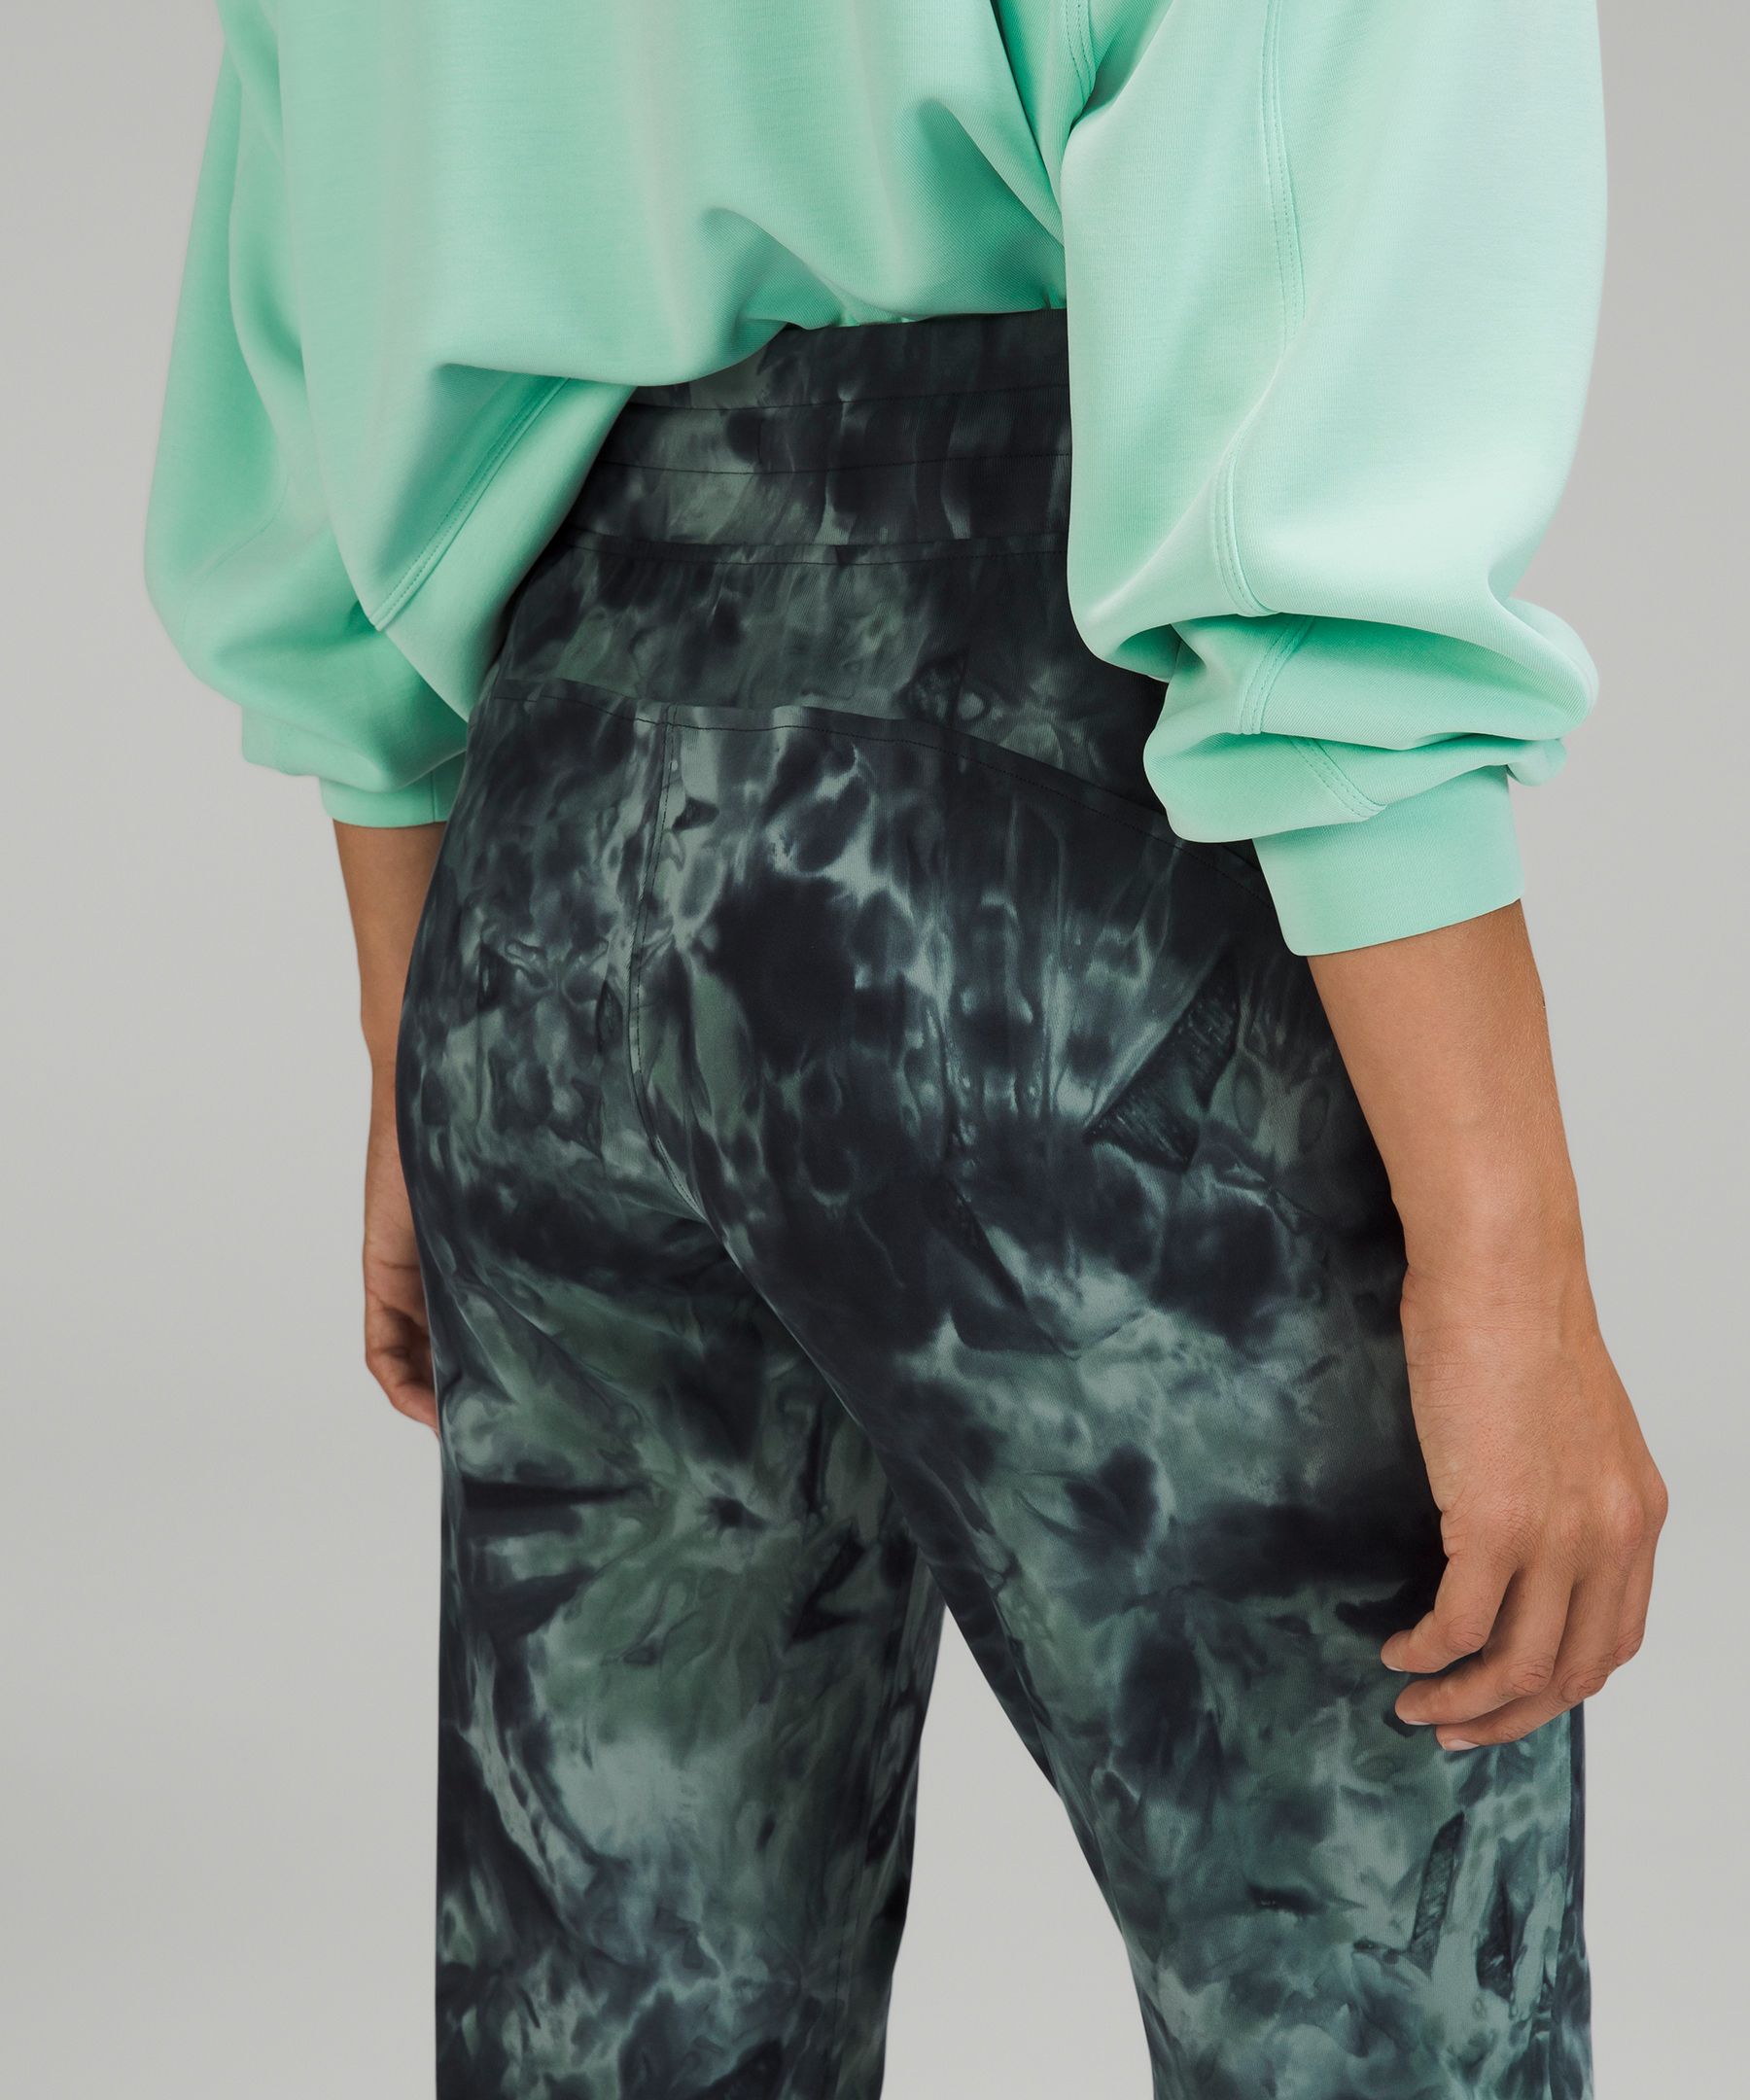 Lululemon rulu jogger Size 6 - $50 (57% Off Retail) - From Paige